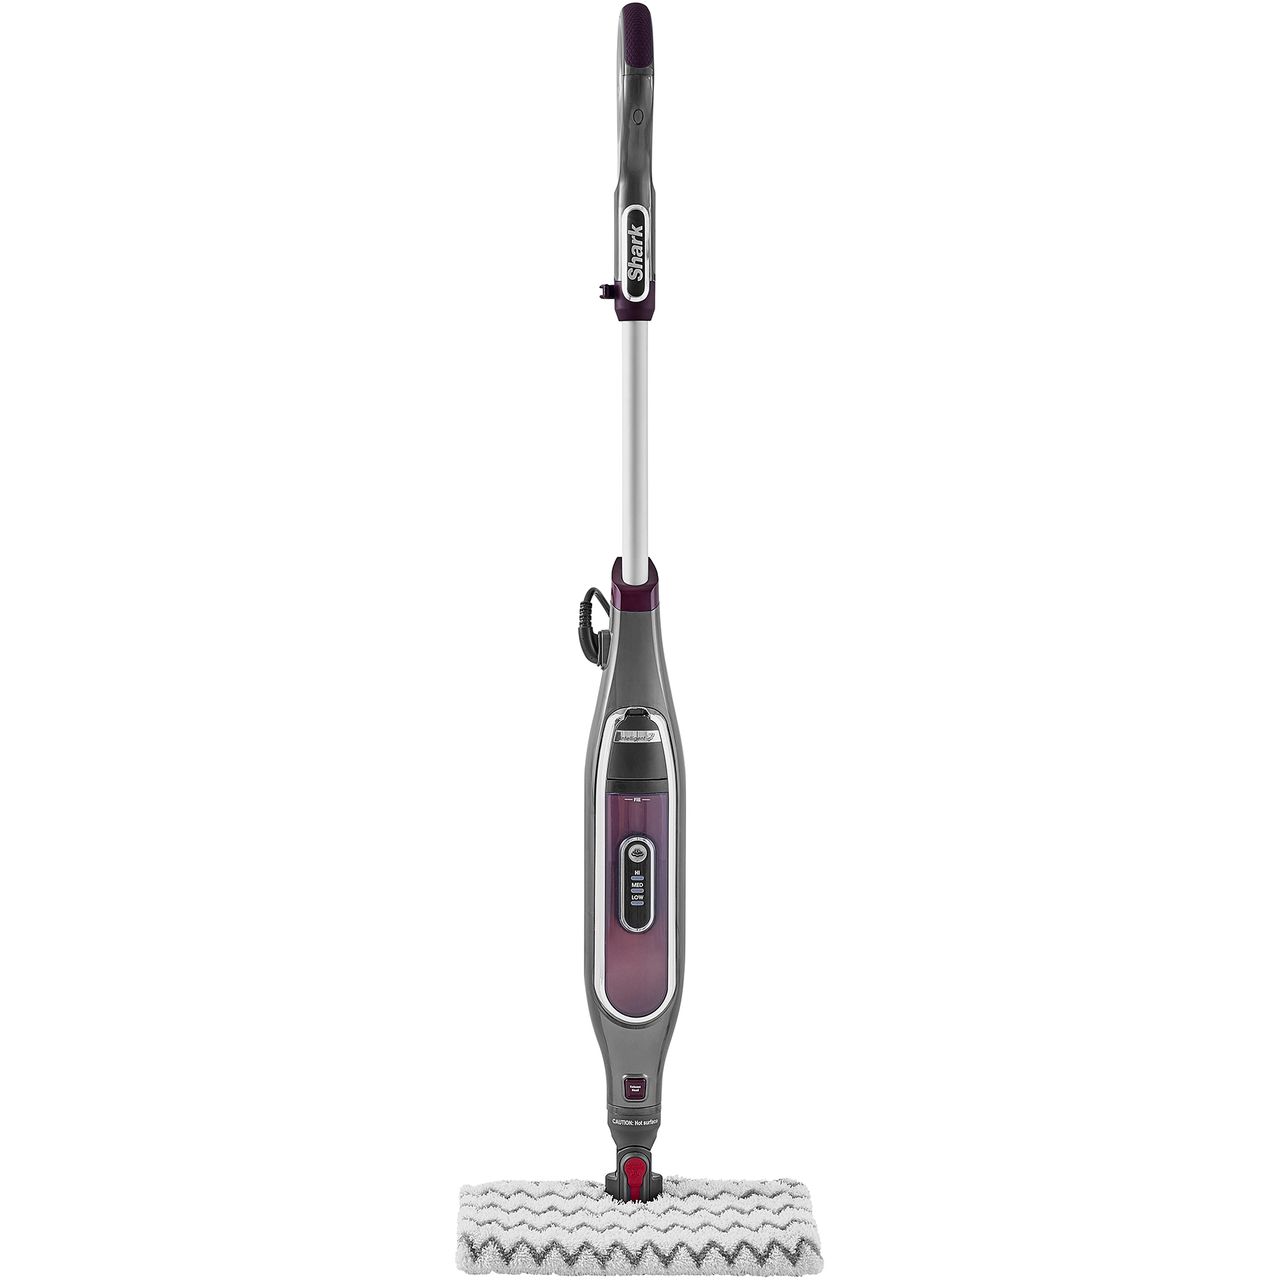 Shark Klik n’ Flip S6003UK Steam Mop with up to 11.5 Minutes Run Time Review